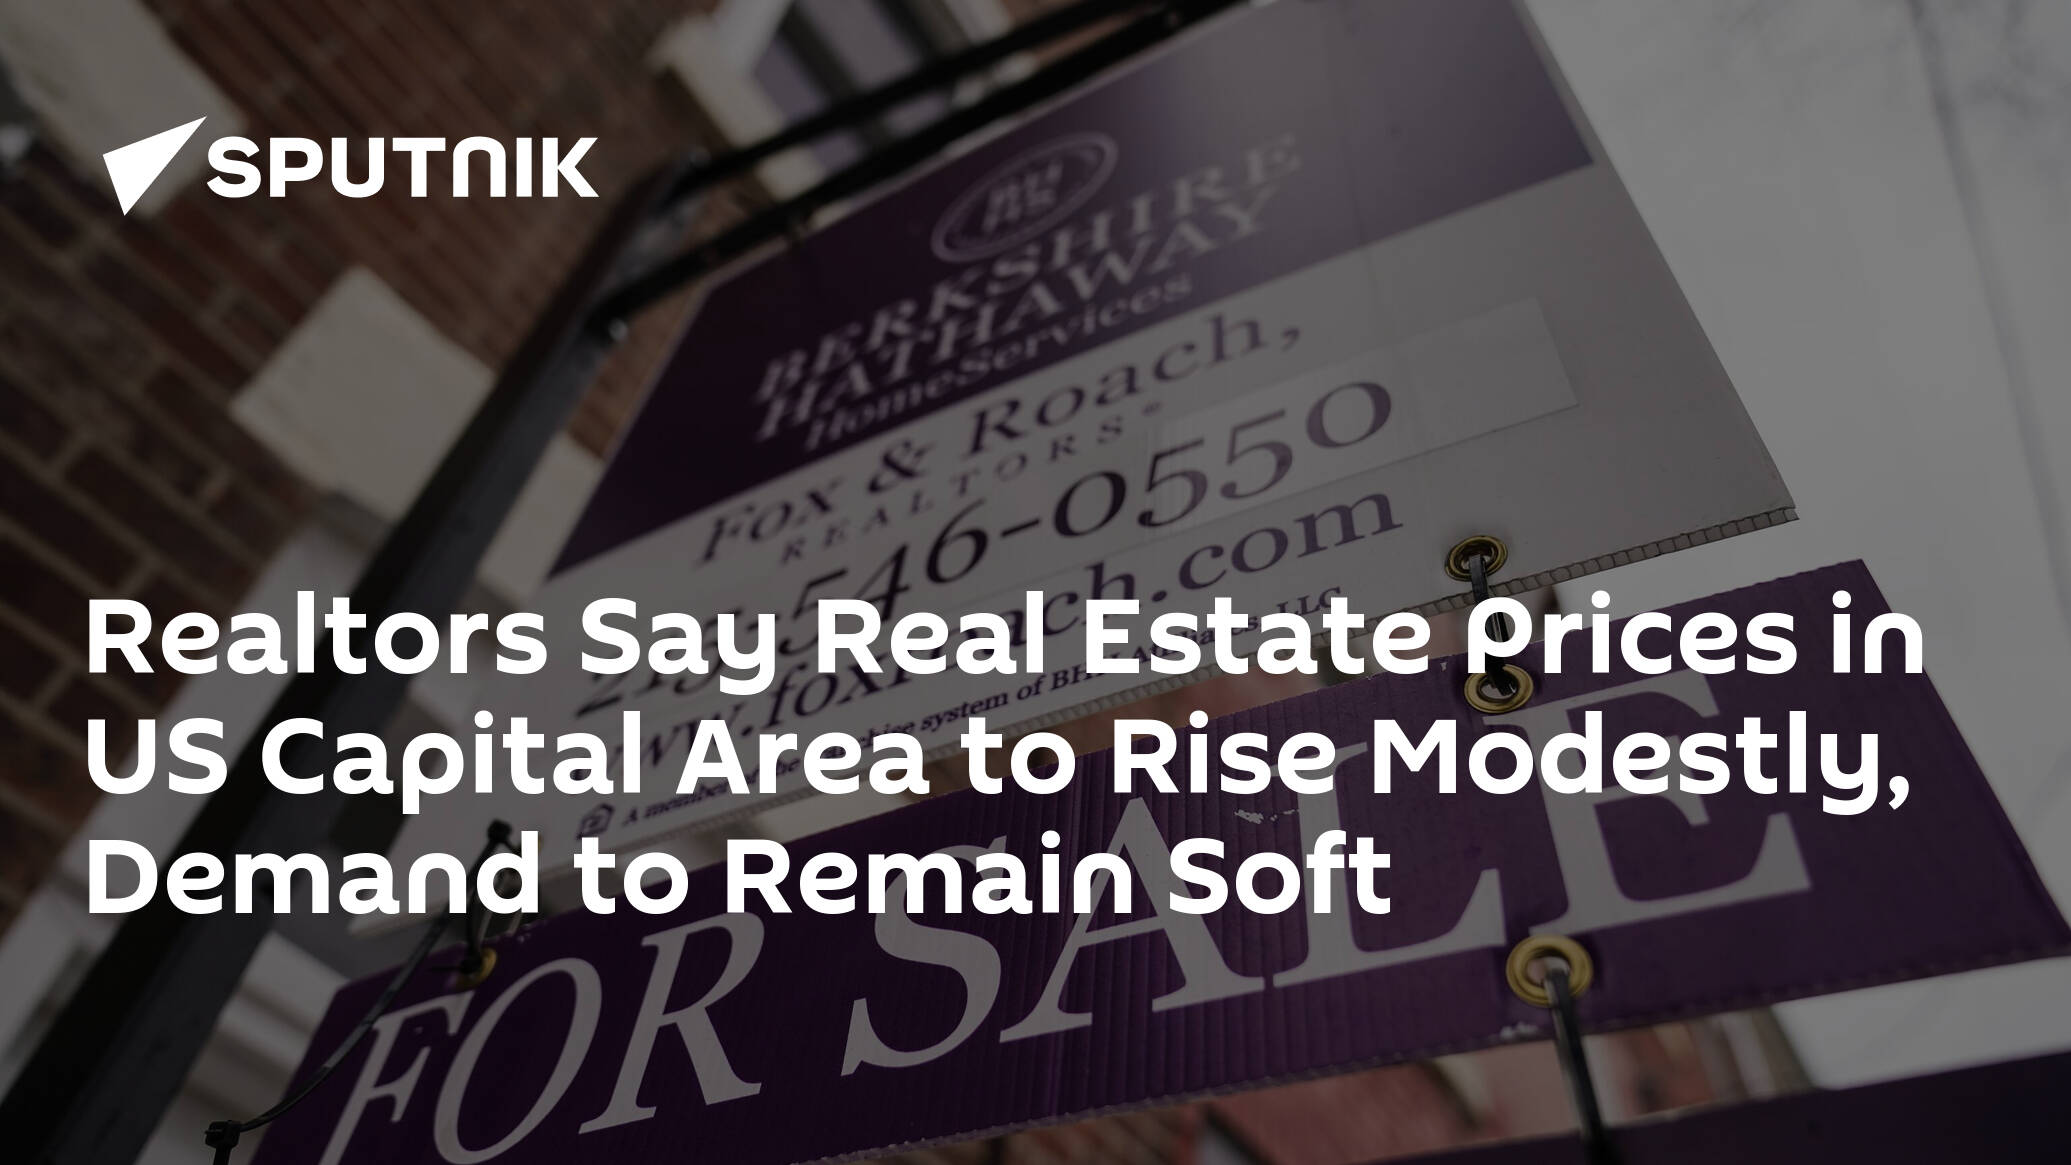 Realtors Say Real Estate Prices in US Capital Area to Rise Modestly, Demand to Remain Soft